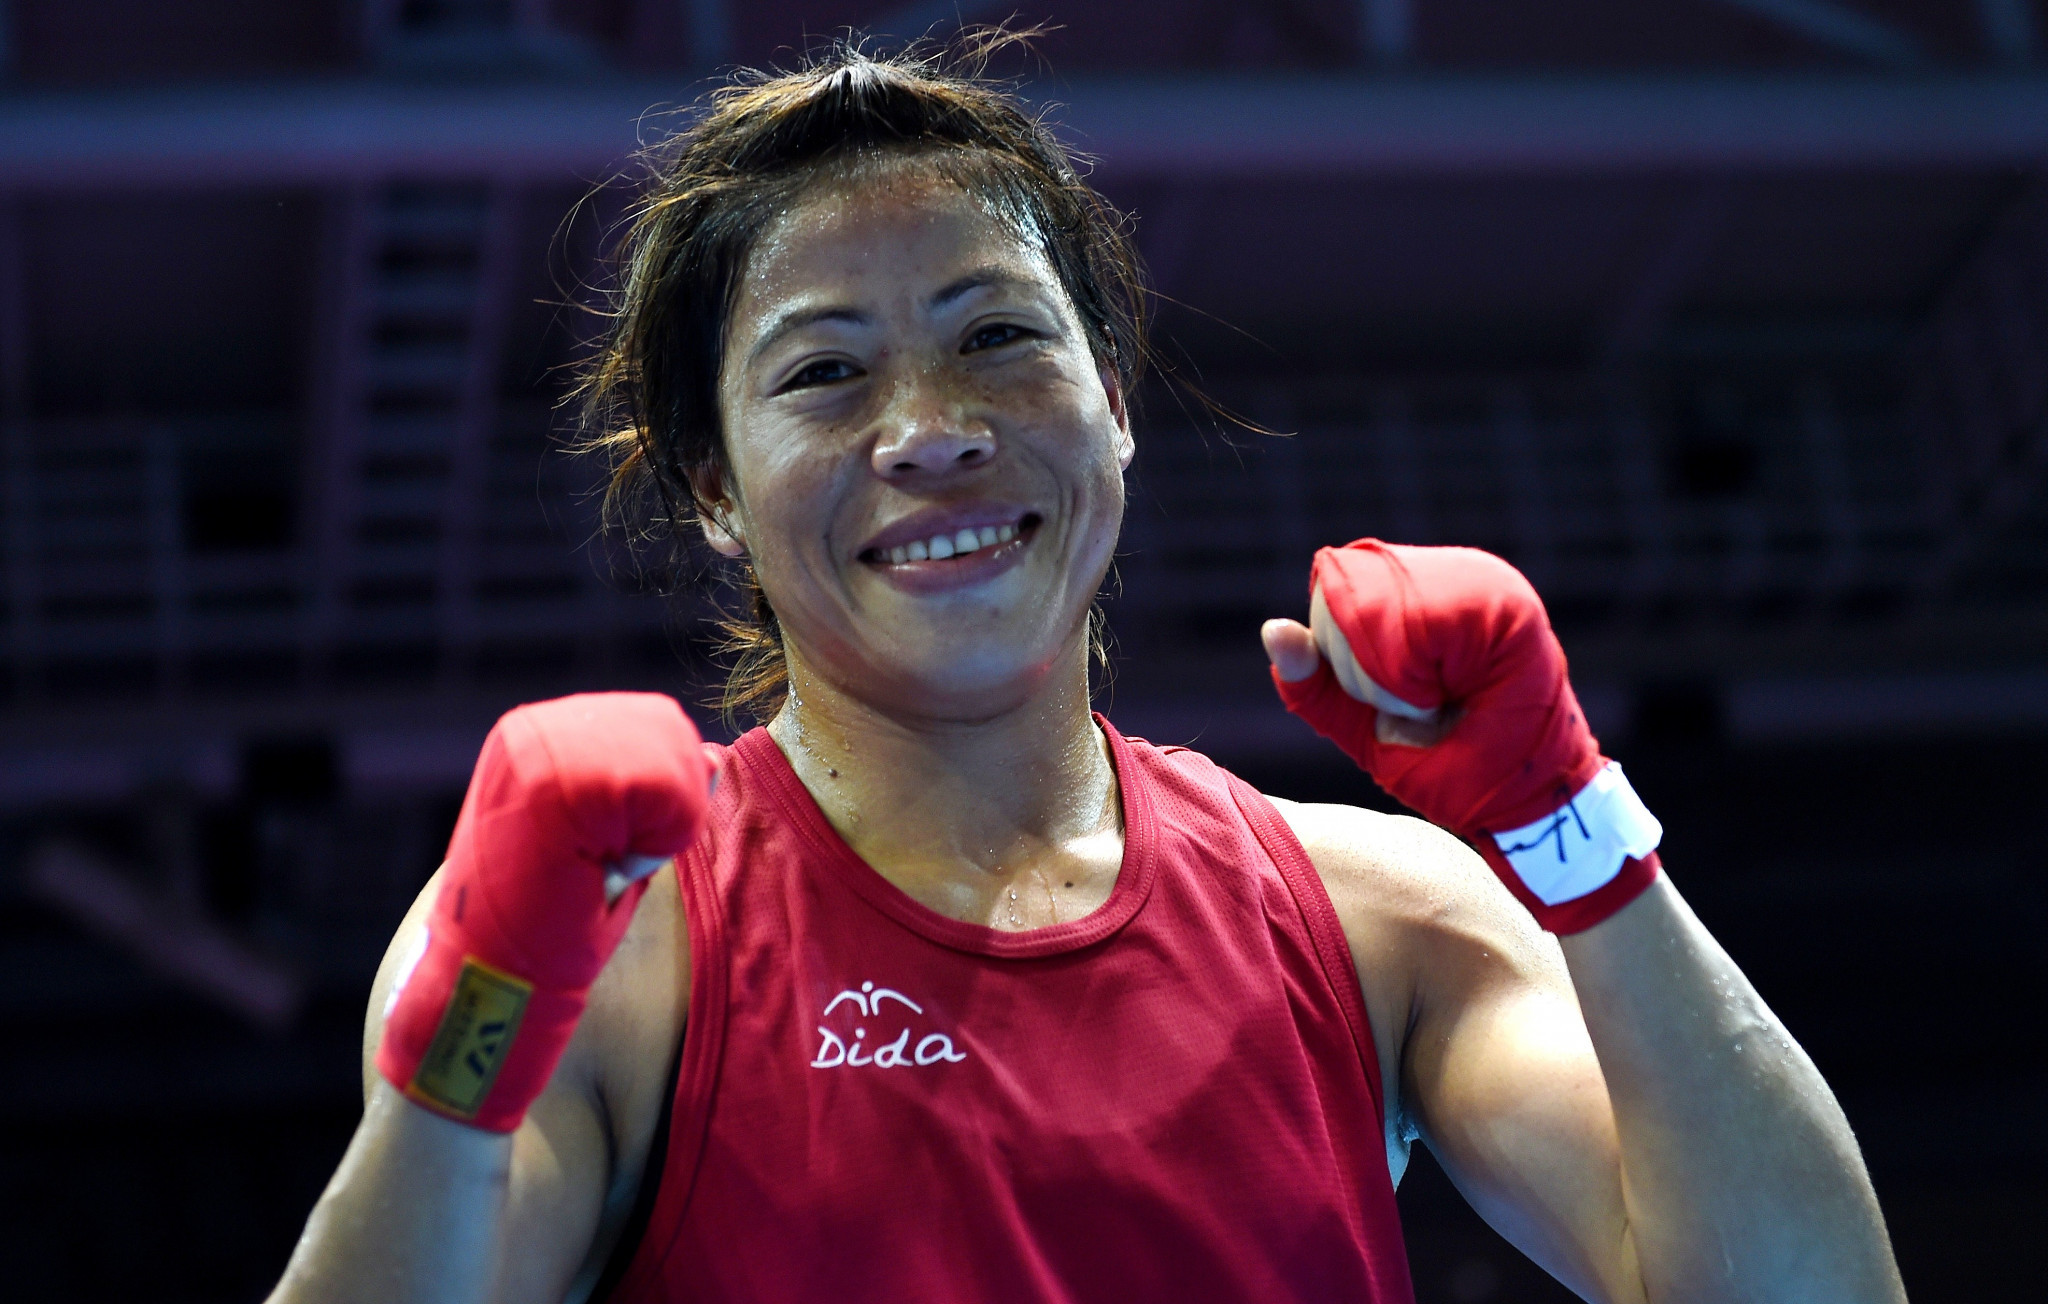 Olympic medallist Mary Kom expressed her disappointment after India's first foreign coach for female boxers resigned last week ©Getty Images